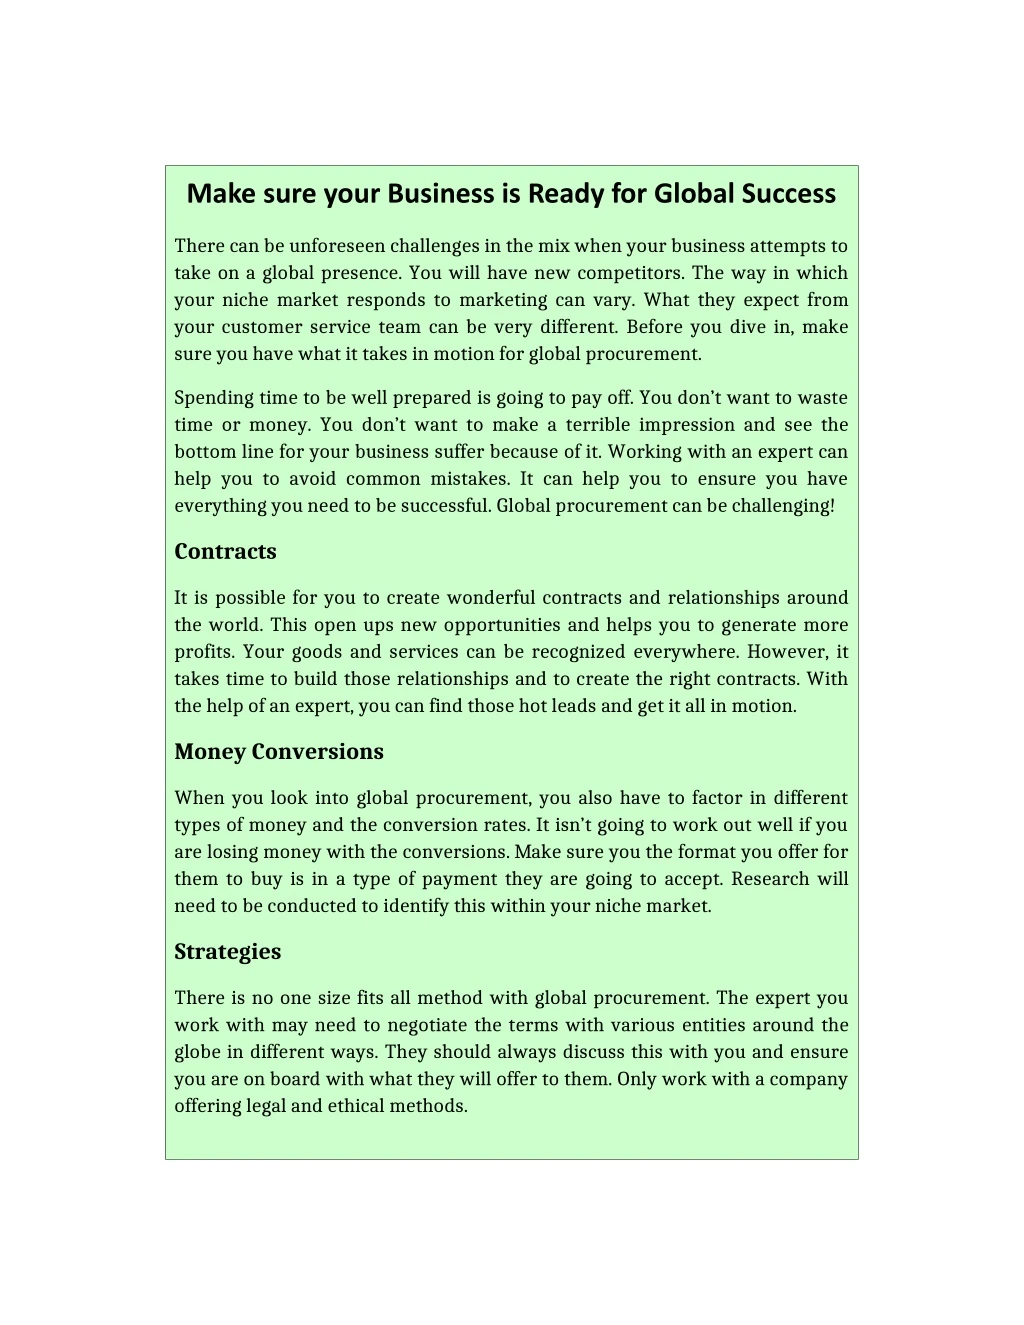 make sure your business is ready for global